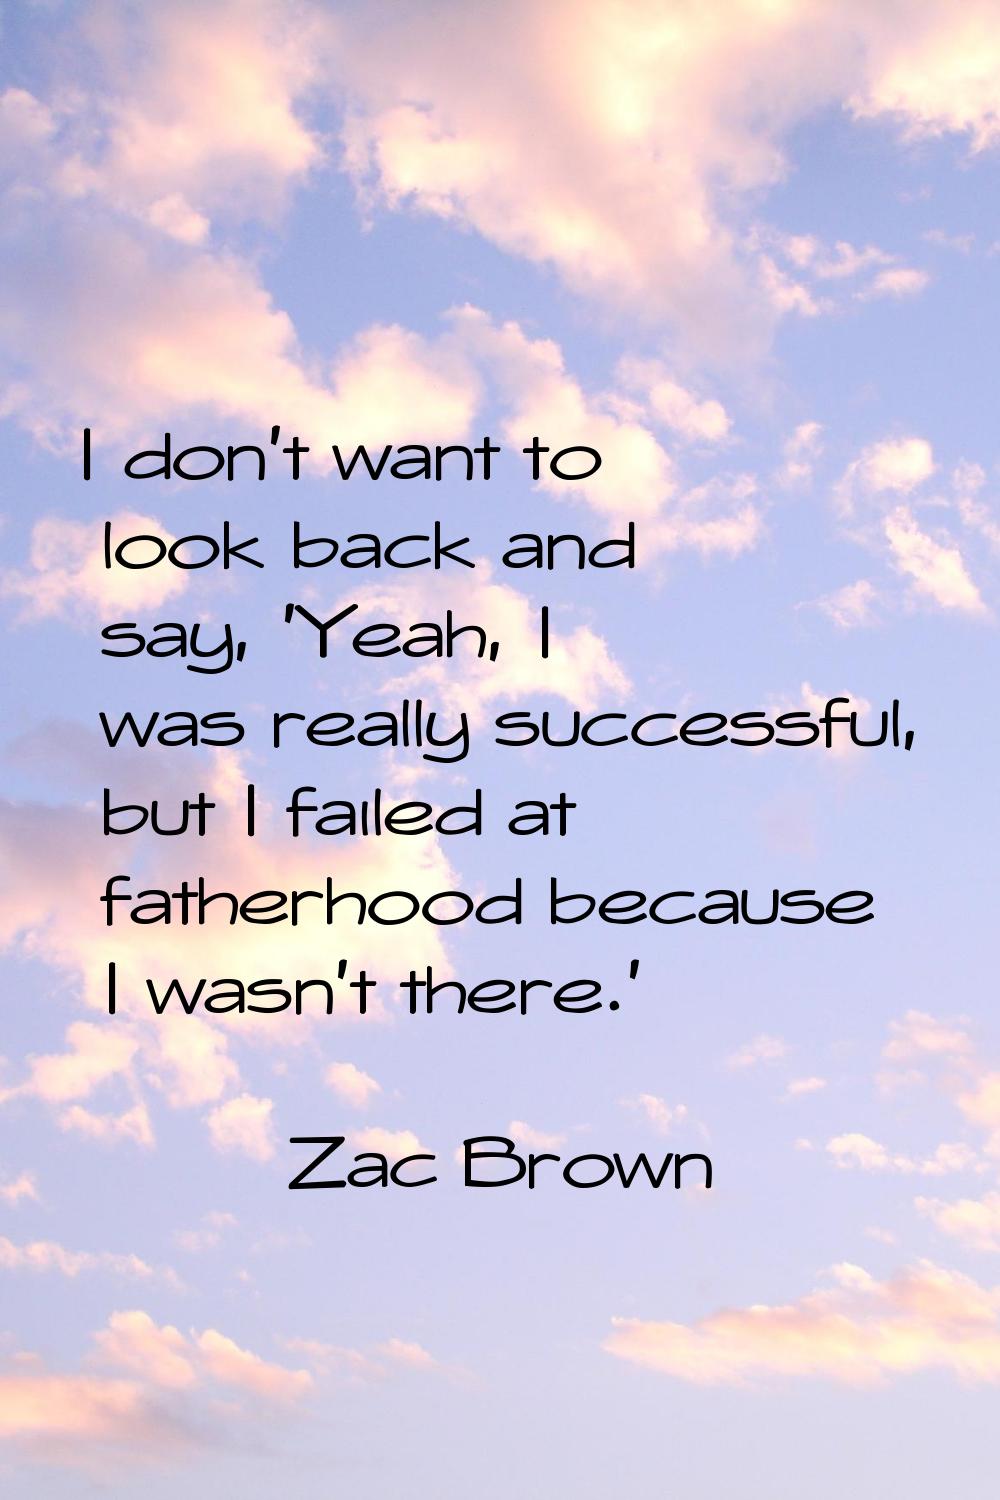 I don't want to look back and say, 'Yeah, I was really successful, but I failed at fatherhood becau